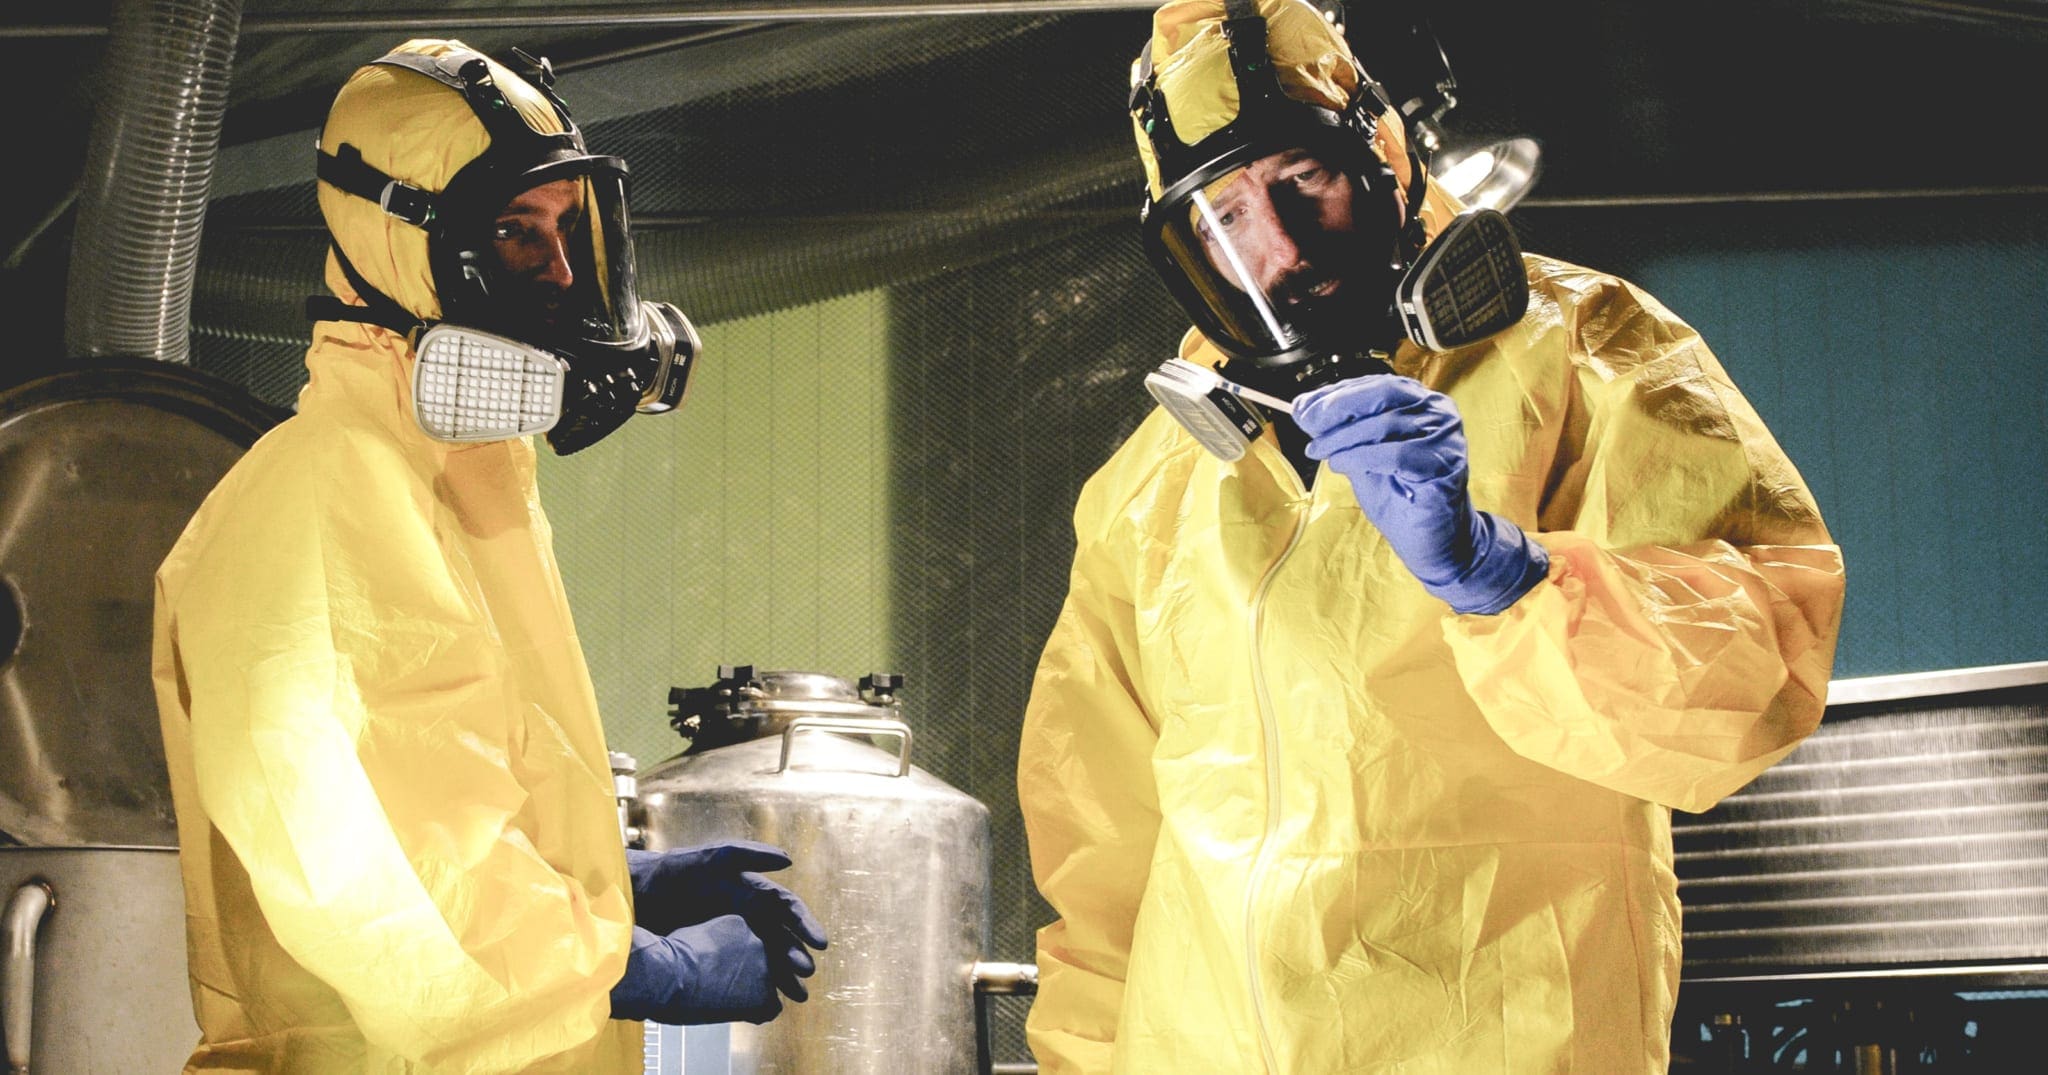 Breaking bad in real life